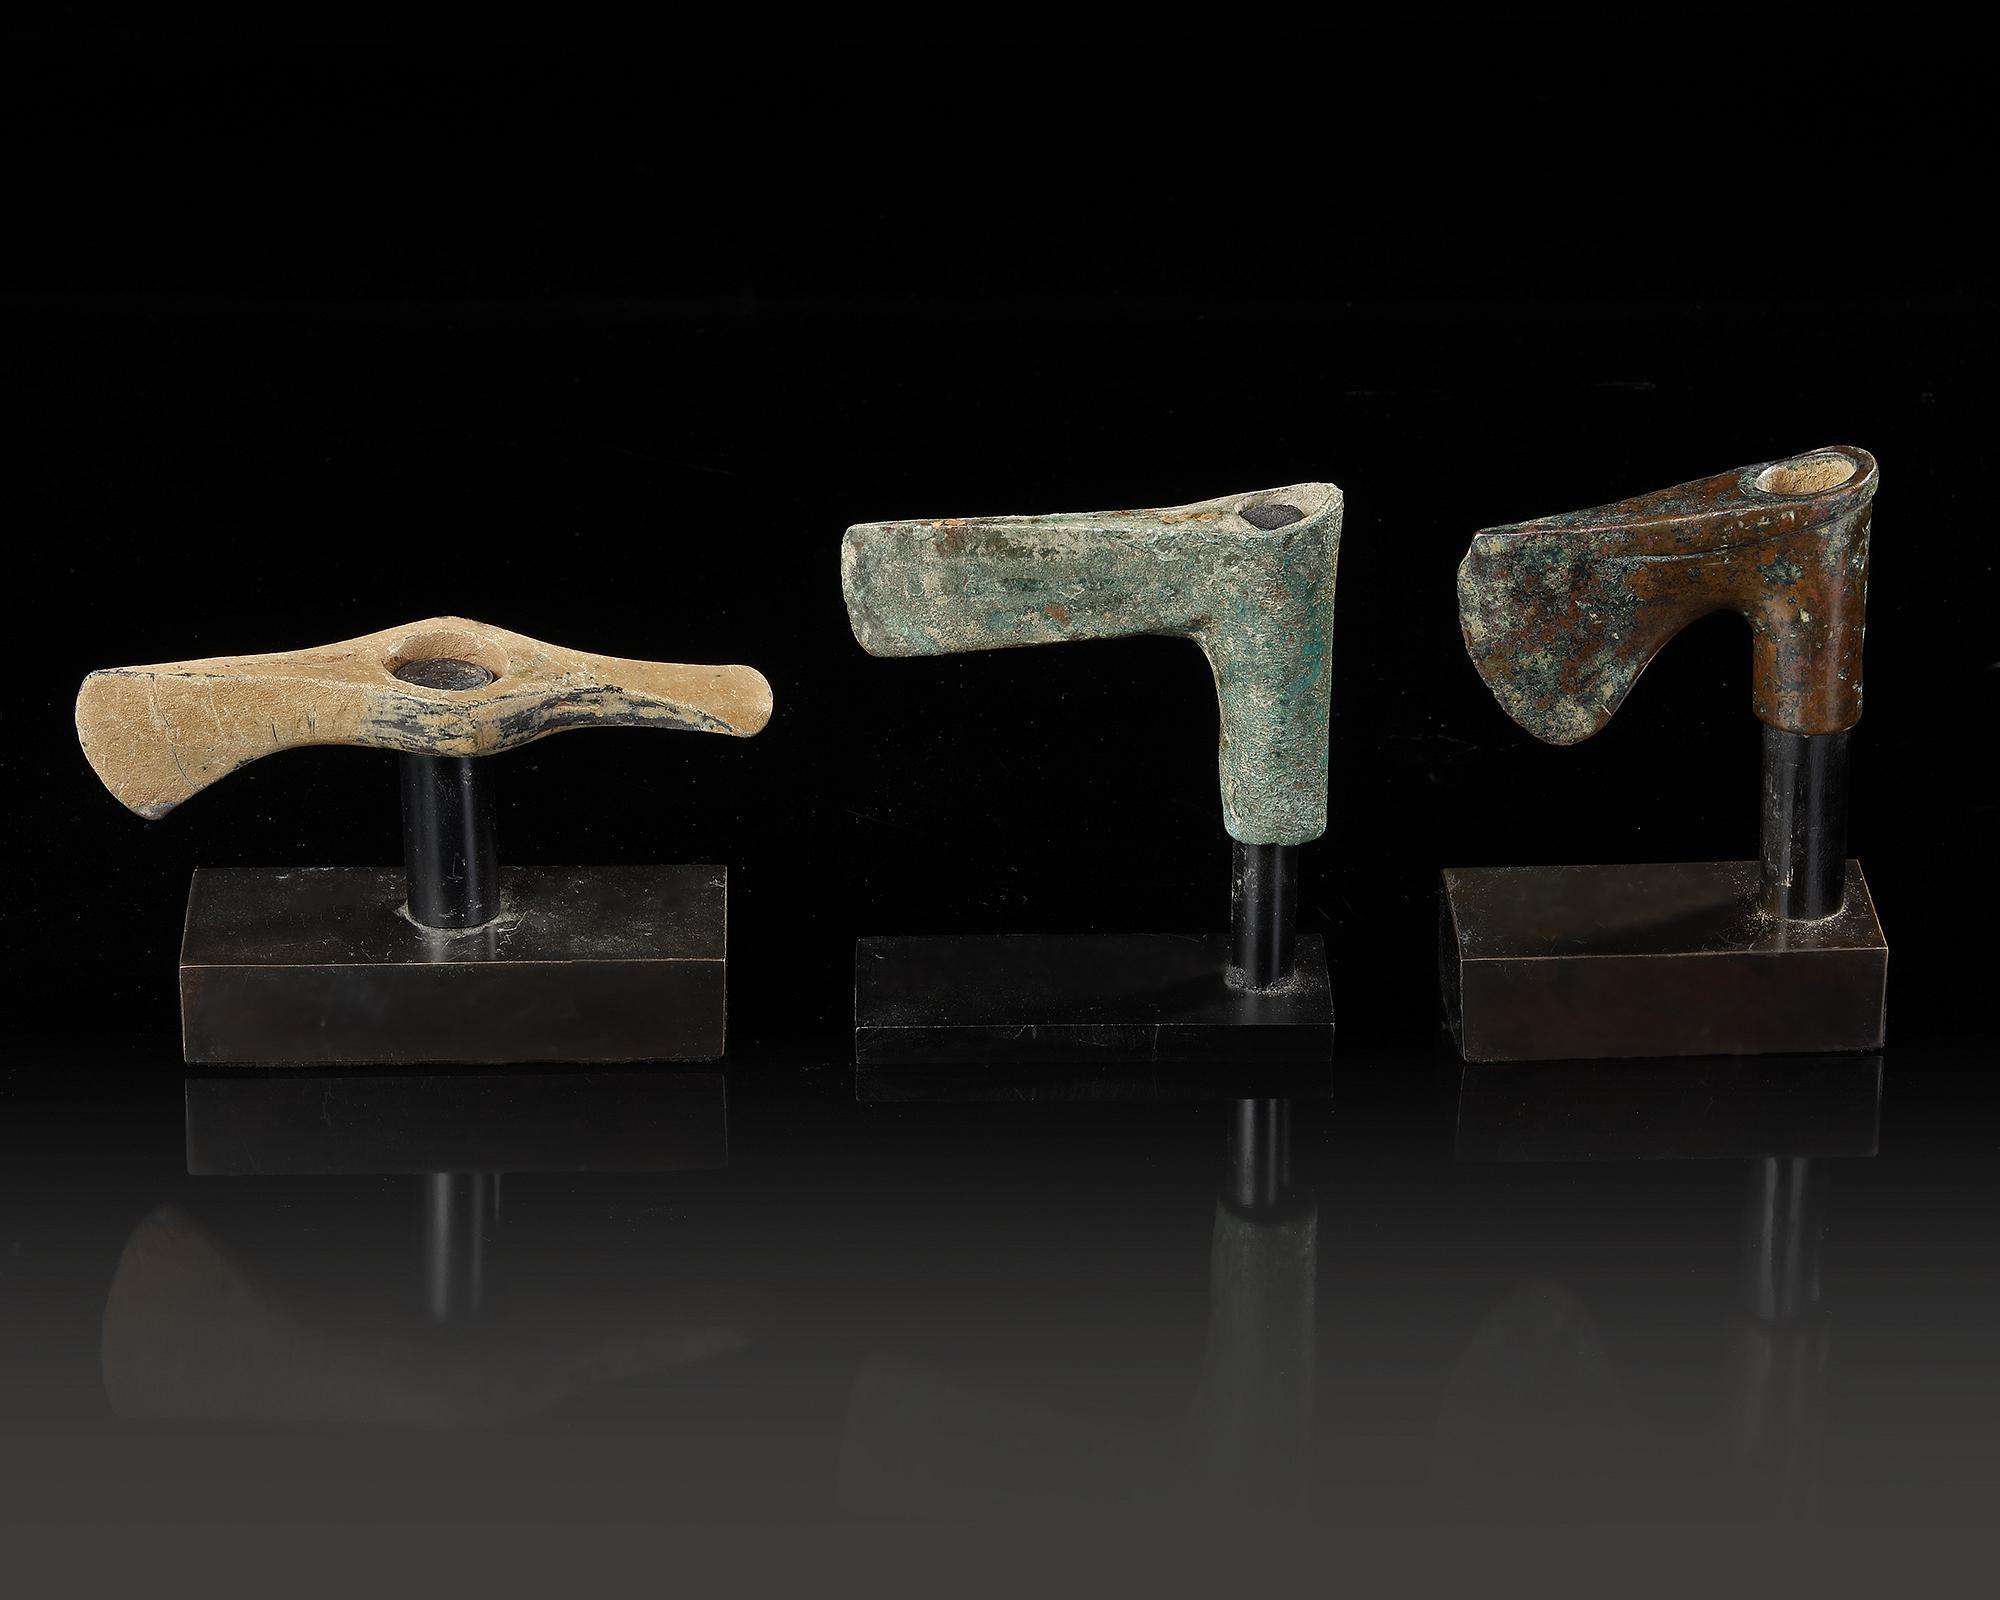 A GROUP OF WESTERN ASIATIC BRONZE AXE HEADS, CIRCA 3RD-2ND MILLENNIUM B.C. - Image 3 of 6